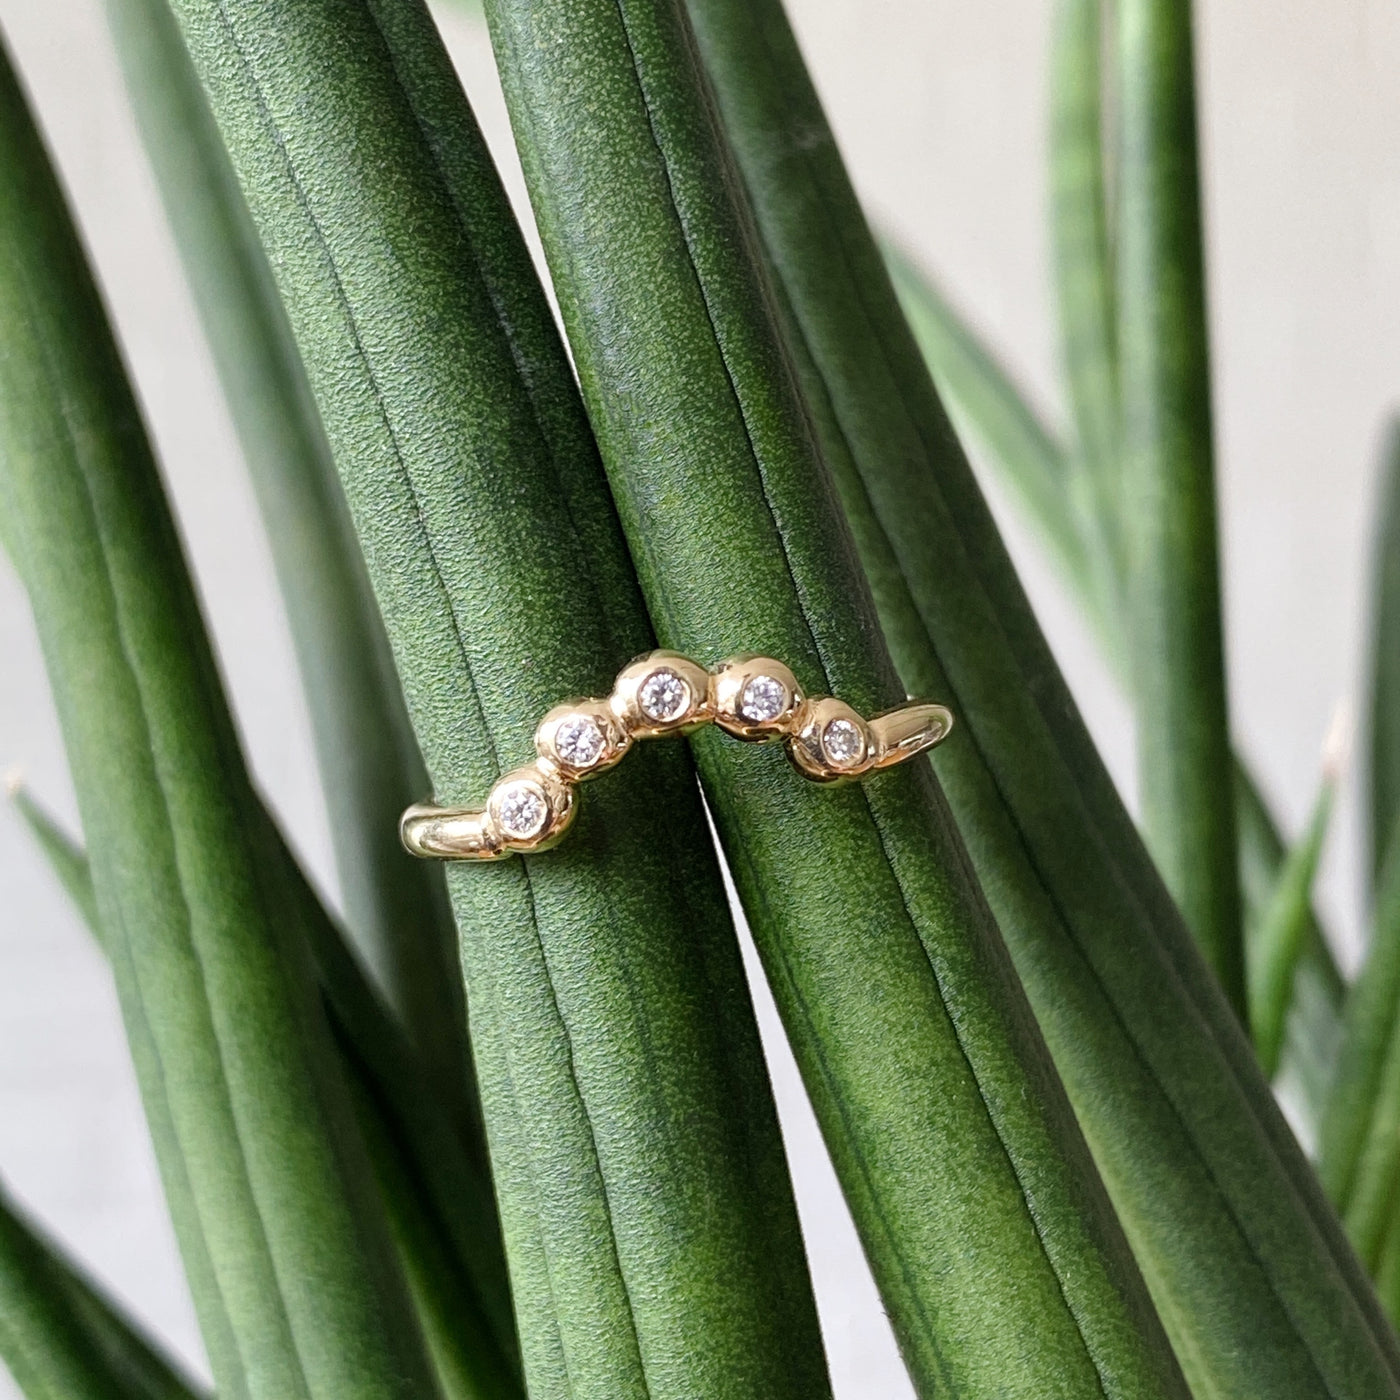 Arched Droplet Band in Yellow Gold with White Diamonds in natural light by Corey Egan